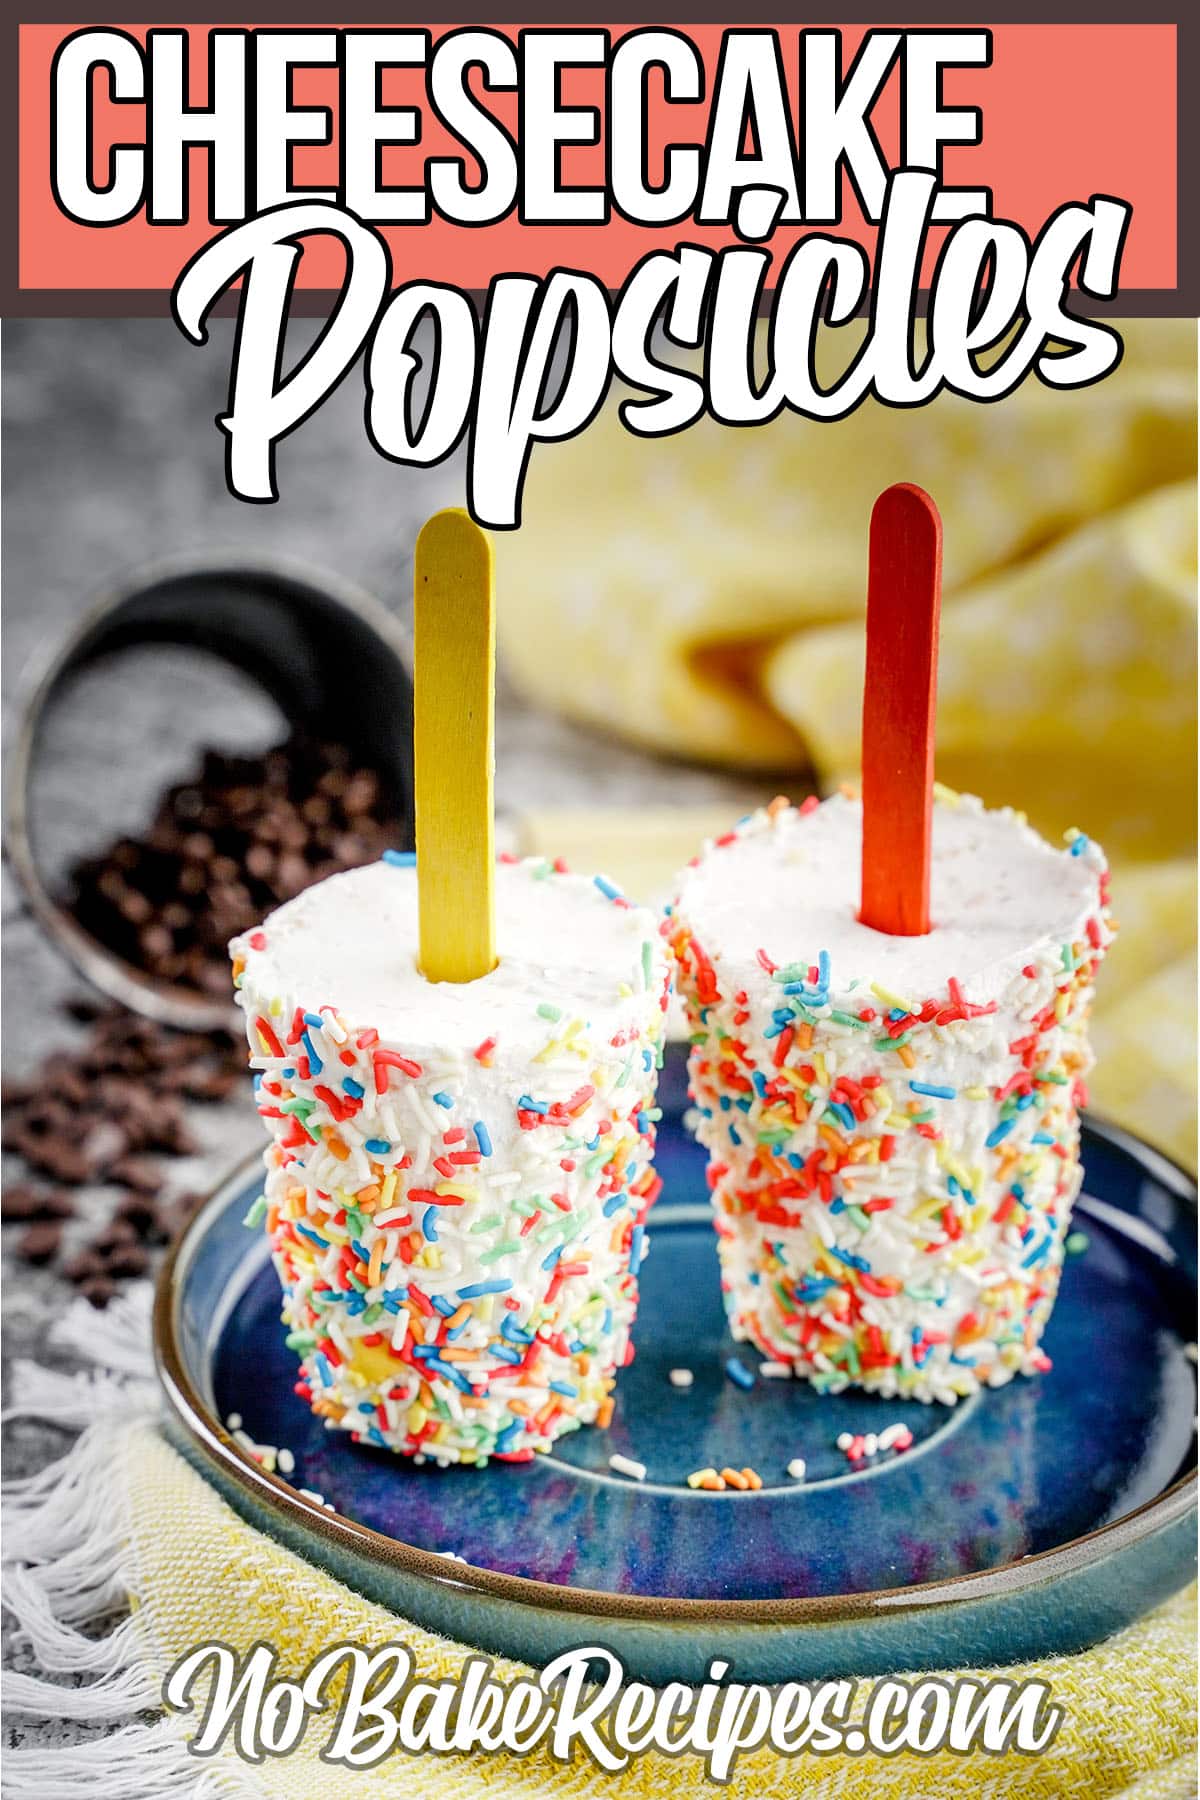 Party Cheesecake Popsicles.